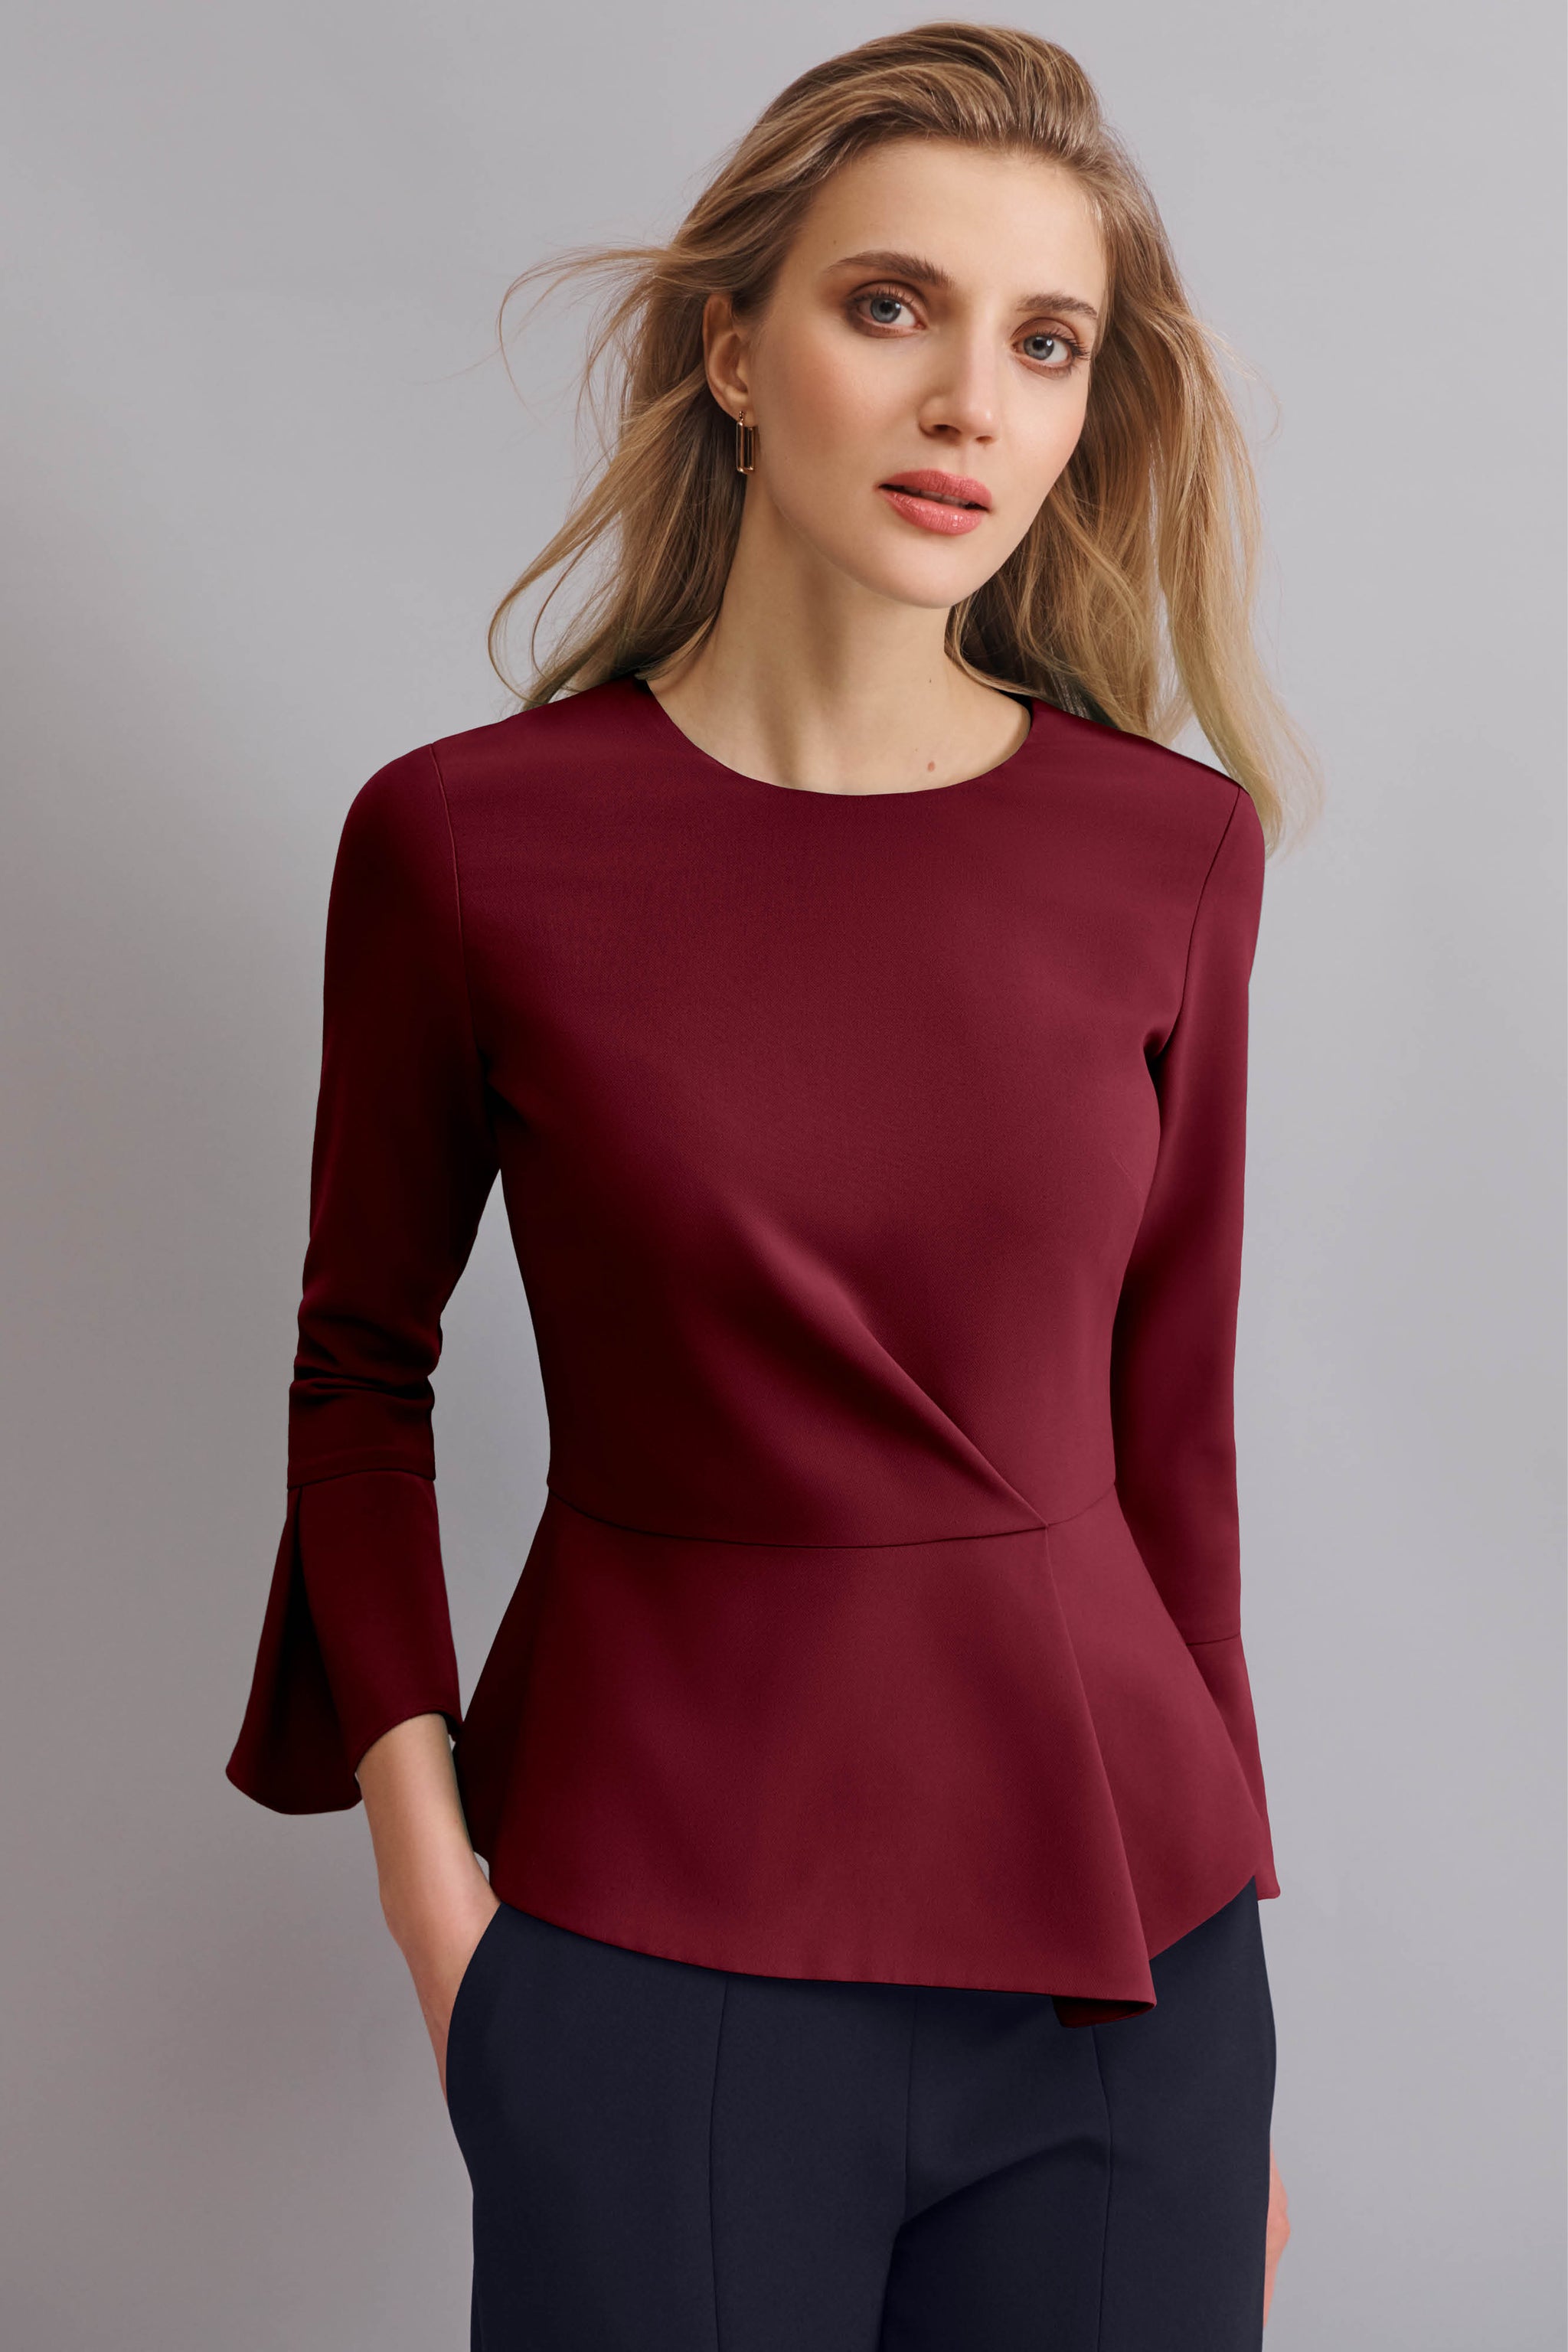 Chepstow Cranberry Top